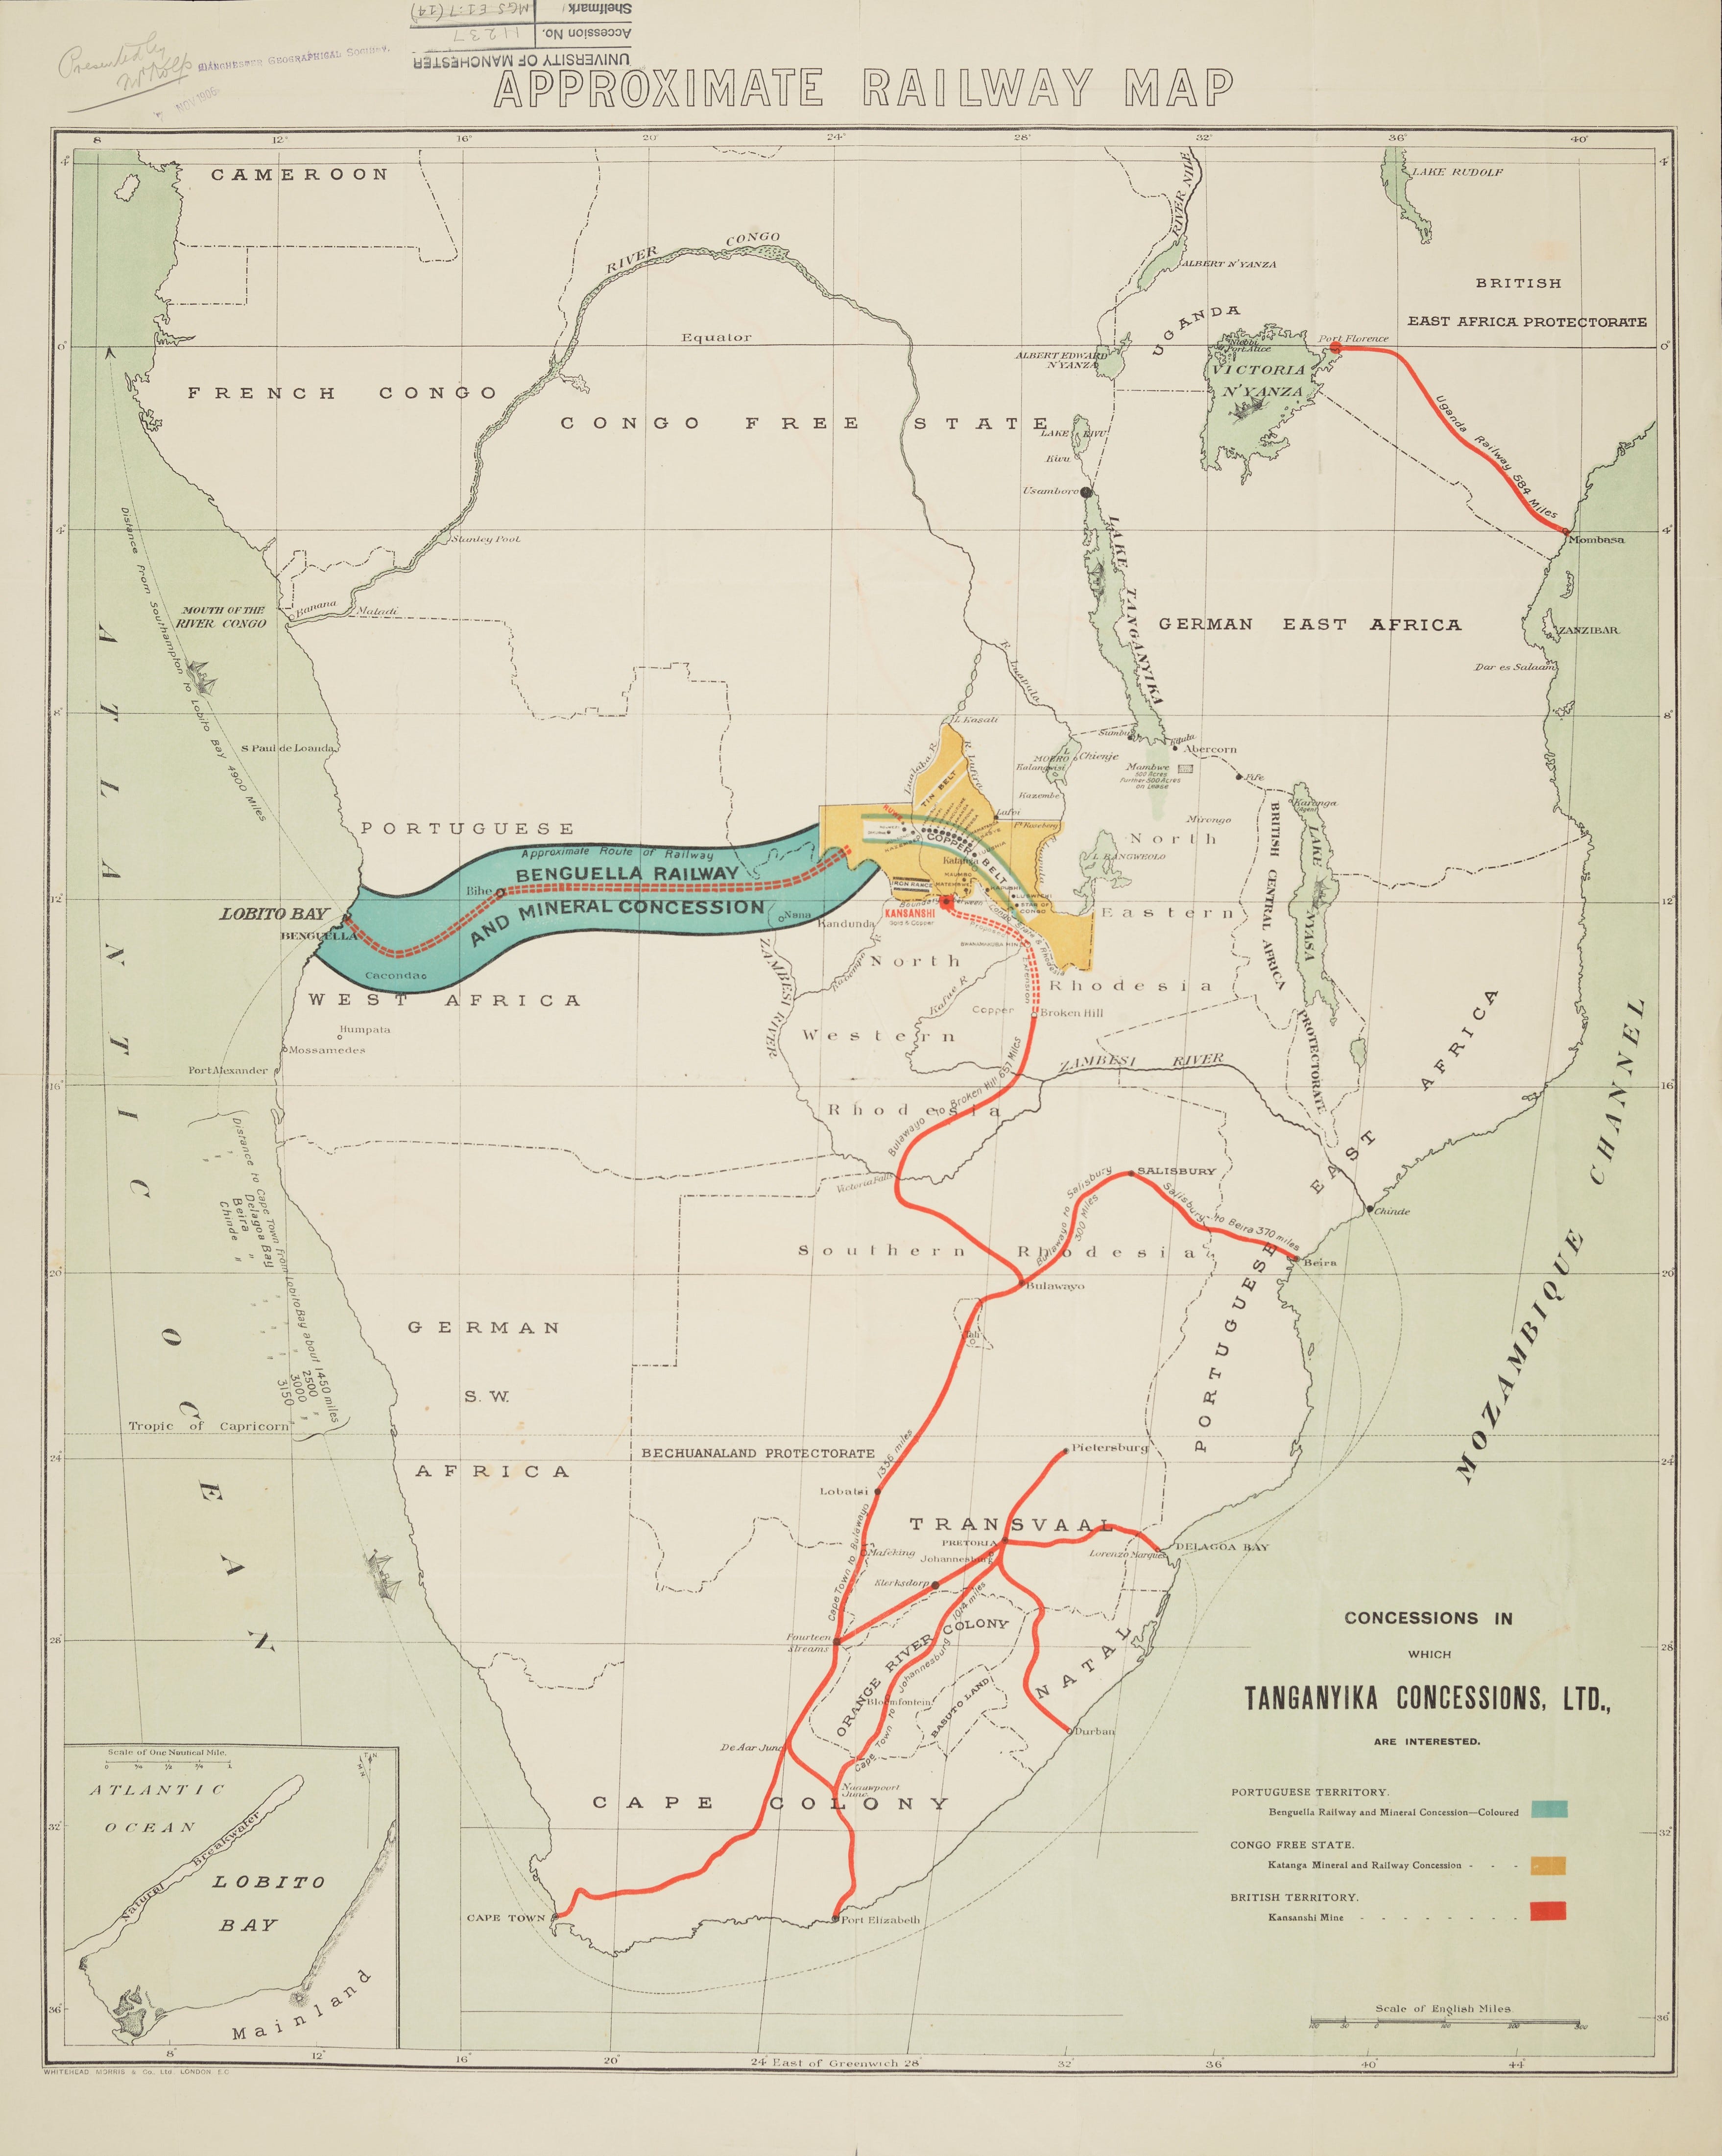 Map of South Africa showing Portuguese, Congo Free State and British concessions, including minerals, mines and railways. Map also shows borders of French, British, German and Portuguese possessions.